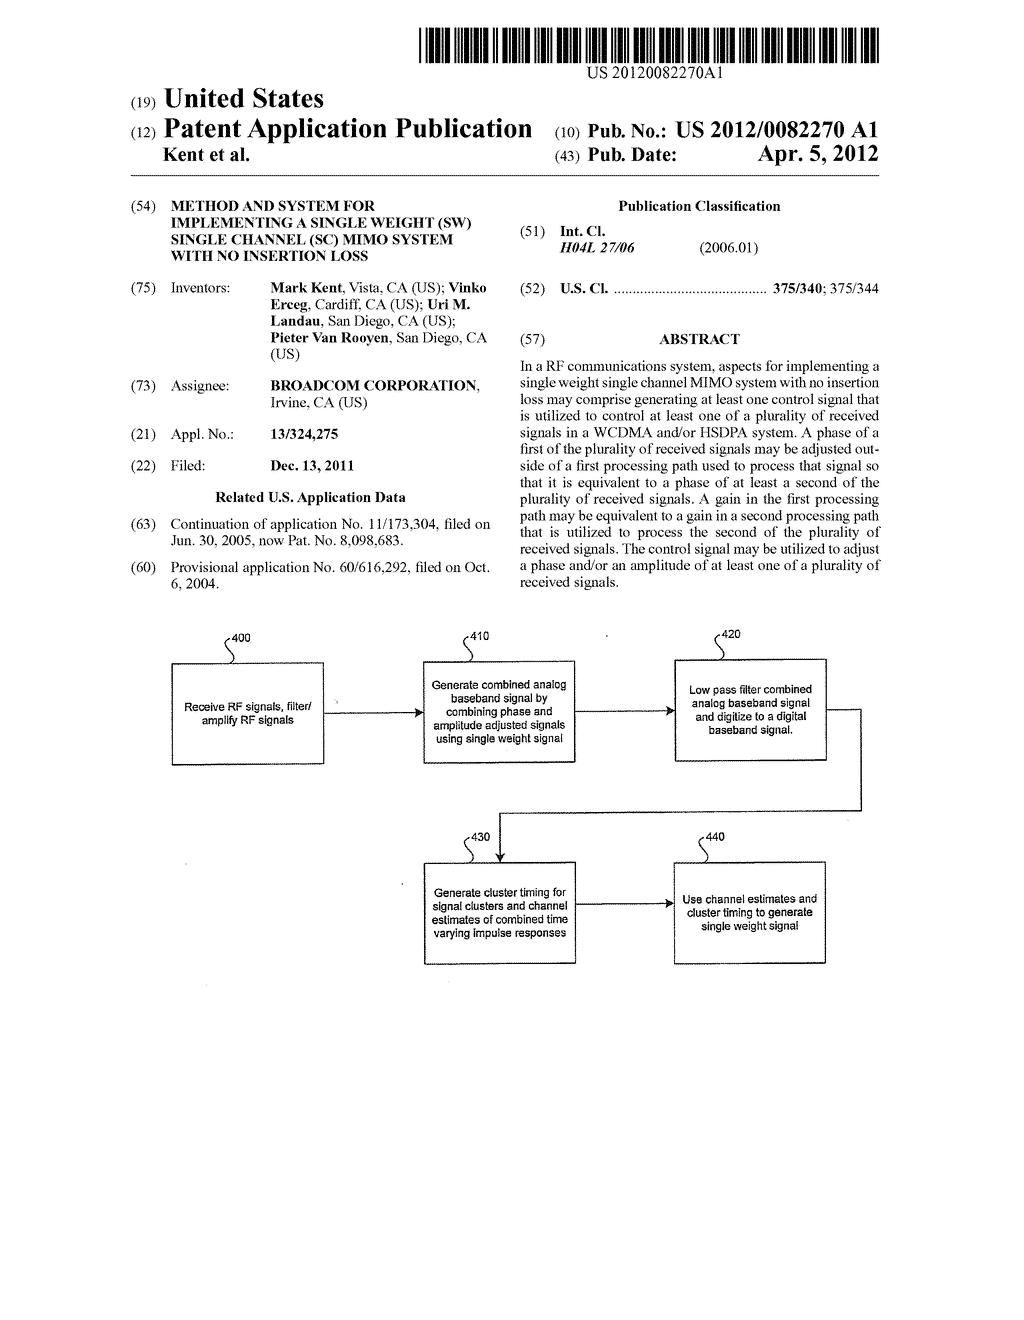 METHOD AND SYSTEM FOR IMPLEMENTING A SINGLE WEIGHT (SW) SINGLE CHANNEL     (SC) MIMO SYSTEM WITH NO INSERTION LOSS - diagram, schematic, and image 01